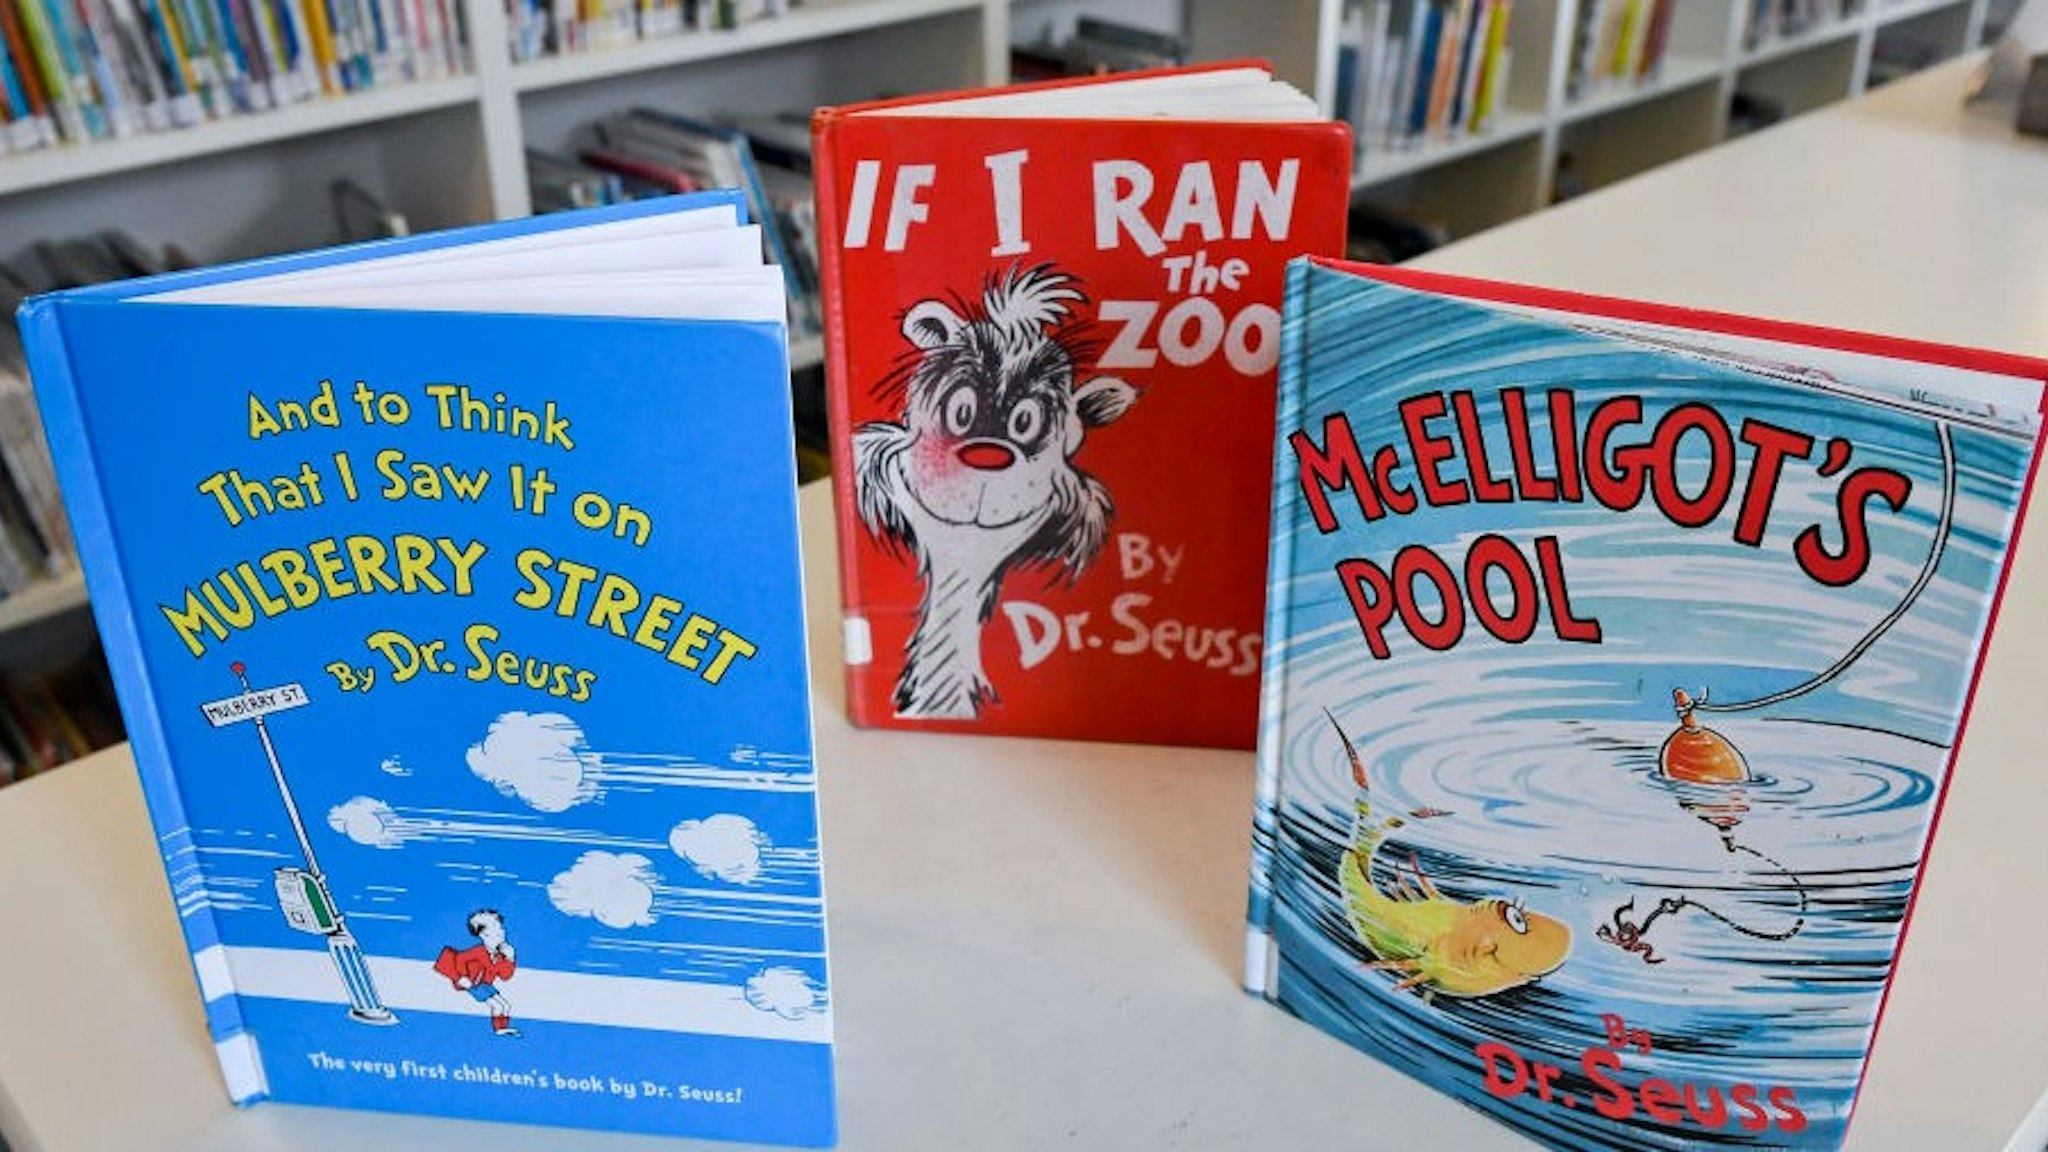 Wyomissing, PA - March 4: Copies of "And to Think That I Saw It on Mulberry Street", "If I Ran the Zoo", and "McElligot's Pool", three of the books by Dr. Suess that will no longer be published. At the Wyomissing Public Library in Wyomissing Thursday afternoon March 4, 2021. Six books by children's book author Dr. Suess will no longer be published because they "portray people in ways that are hurtful and wrong". (Photo by